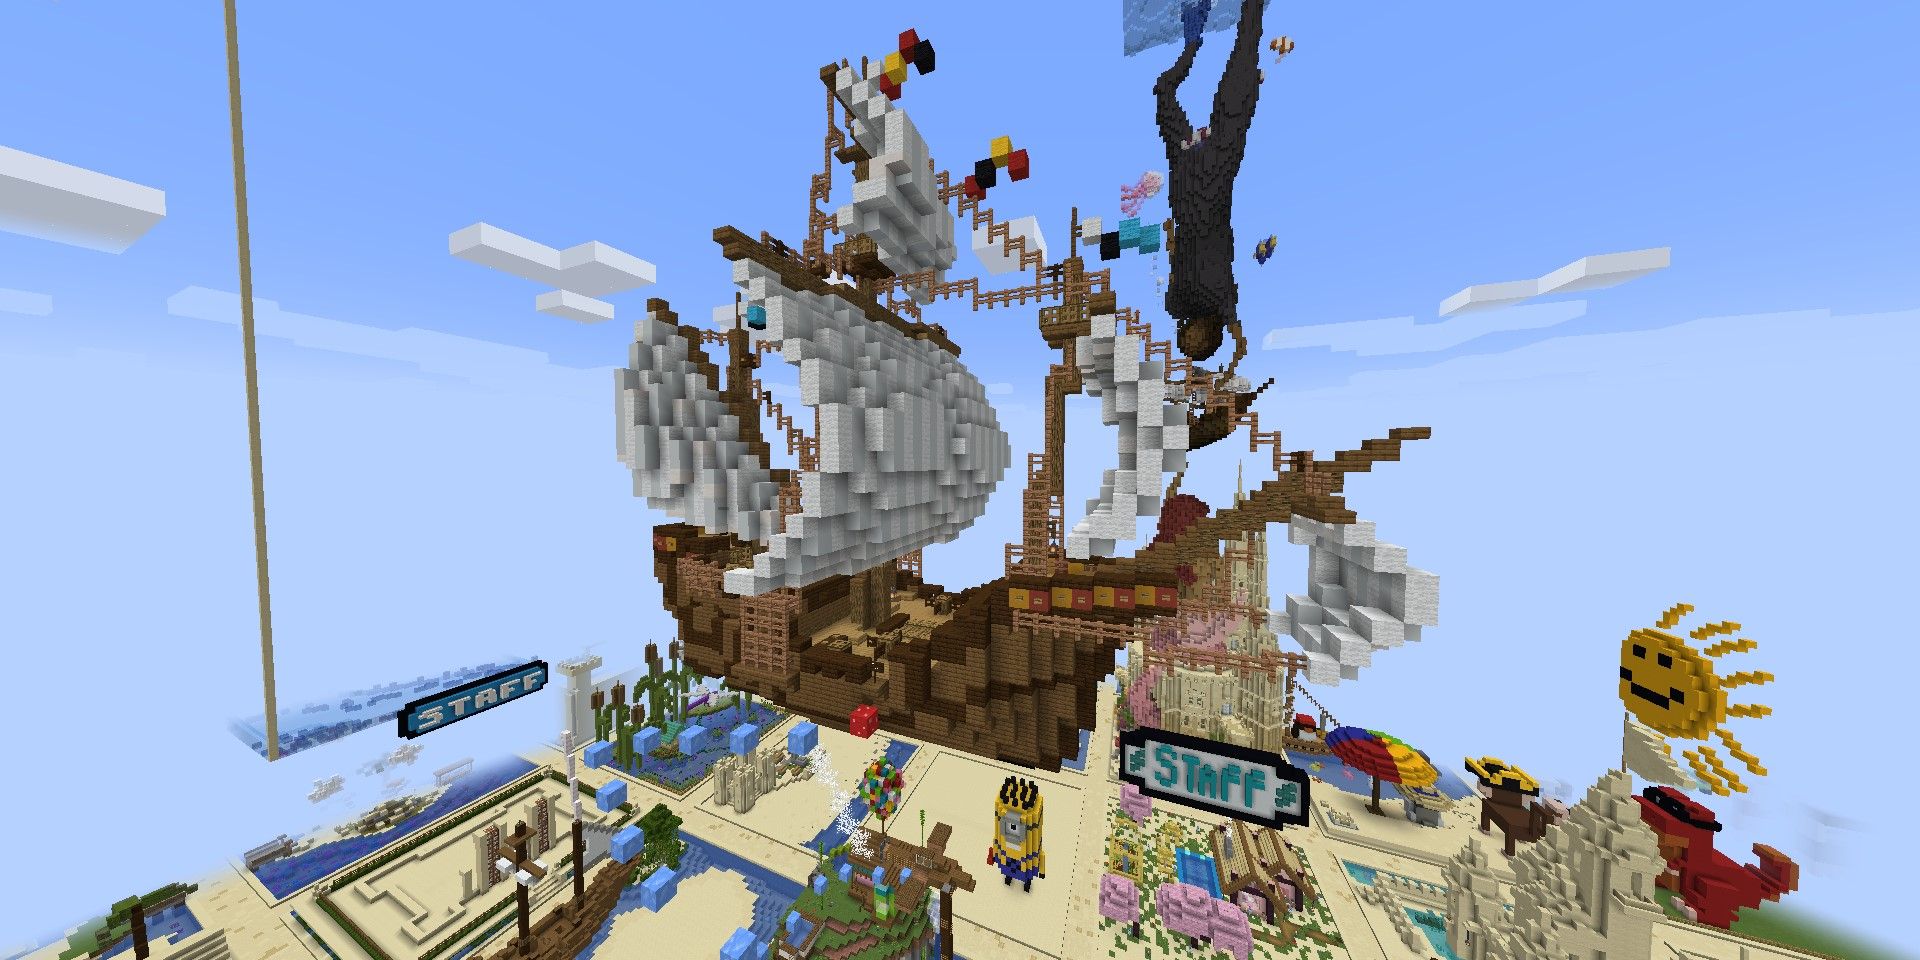 Several Build Battle creations in Minecraft.